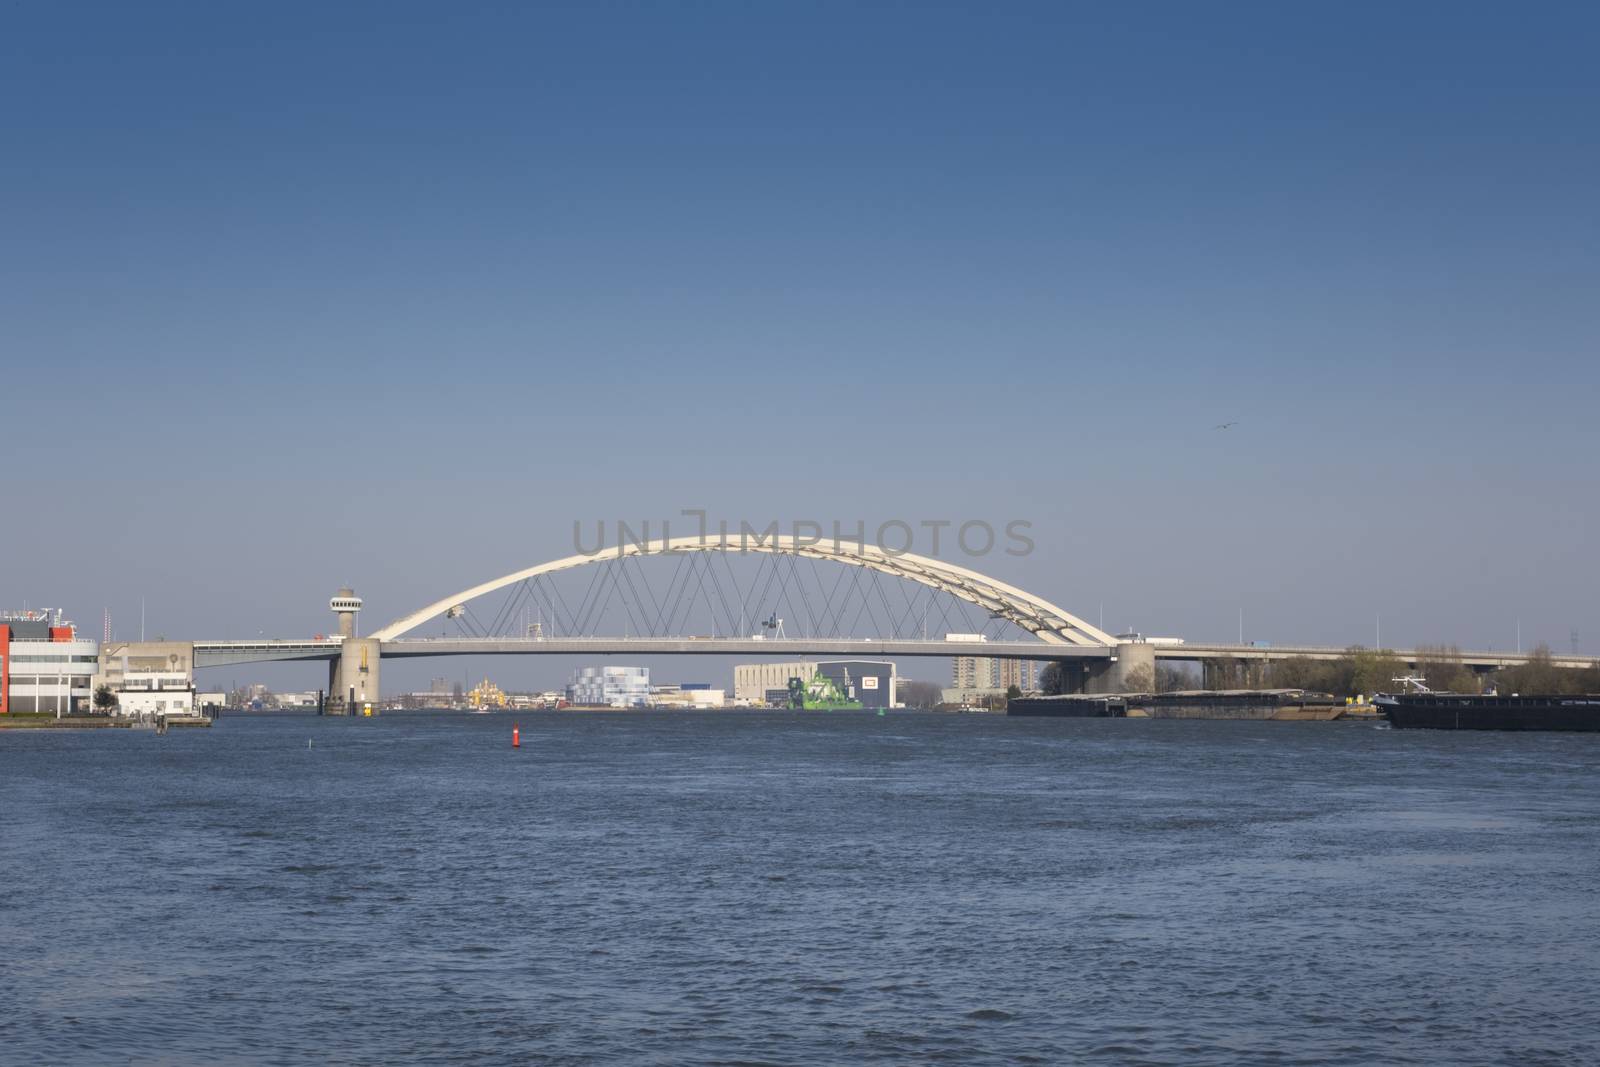 Van Brienenoord Bridge in Rotterdam over the river Nieuwe Maas seen from the north bank on the east side. The two arch bridges, part of the A16 motorway, were completed in 1965 and 1990 respectively.